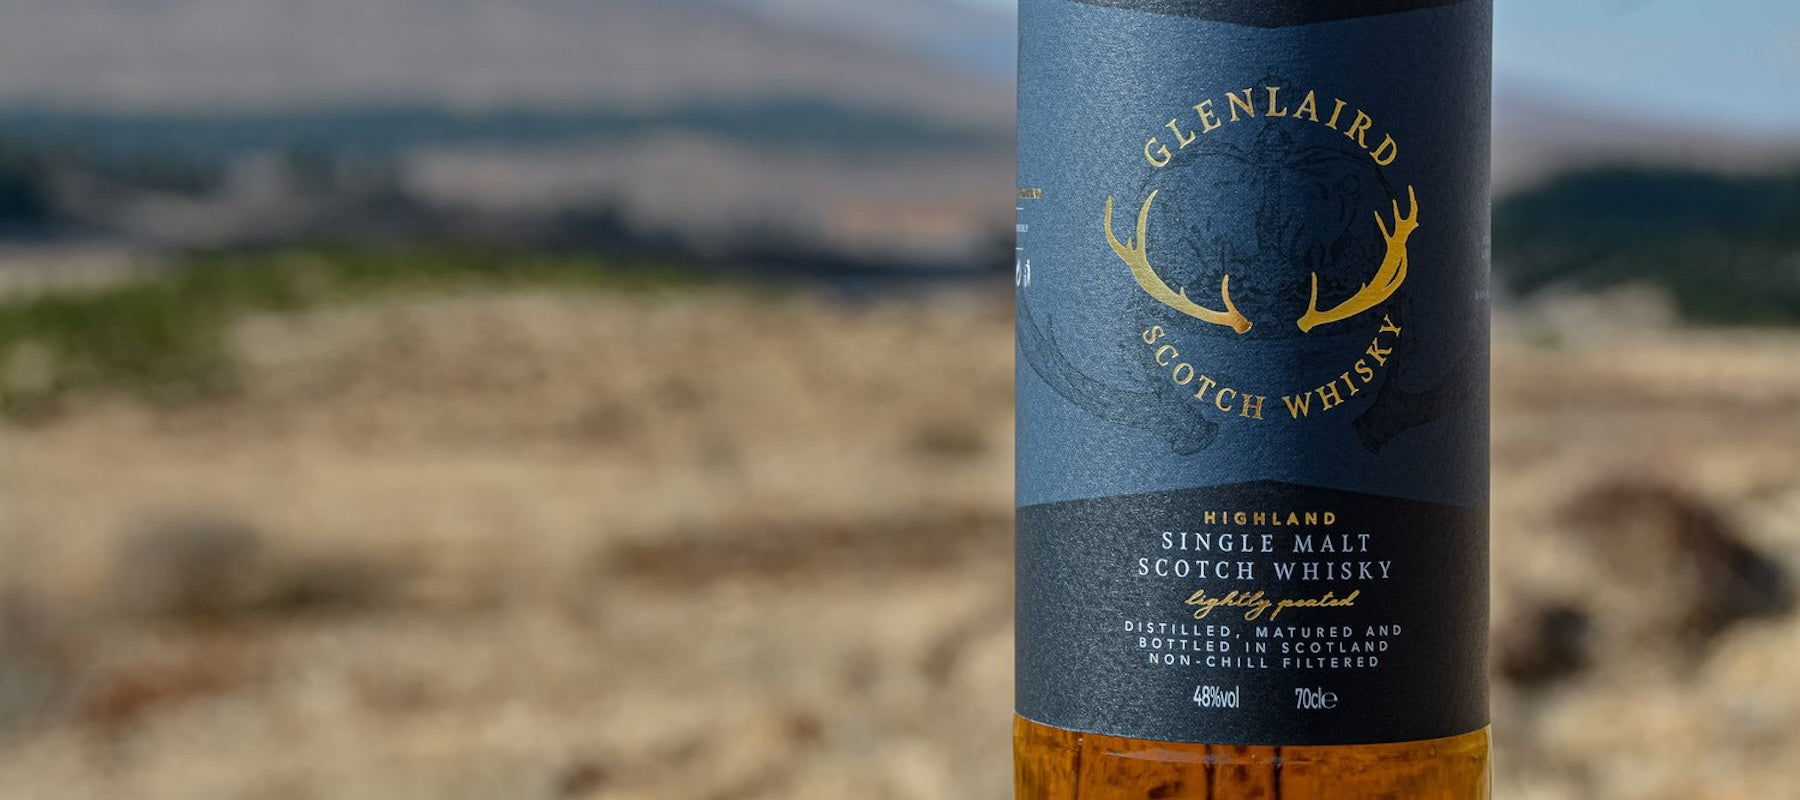 Whisky Under £50 Review: Glenlaird 10 Year Old